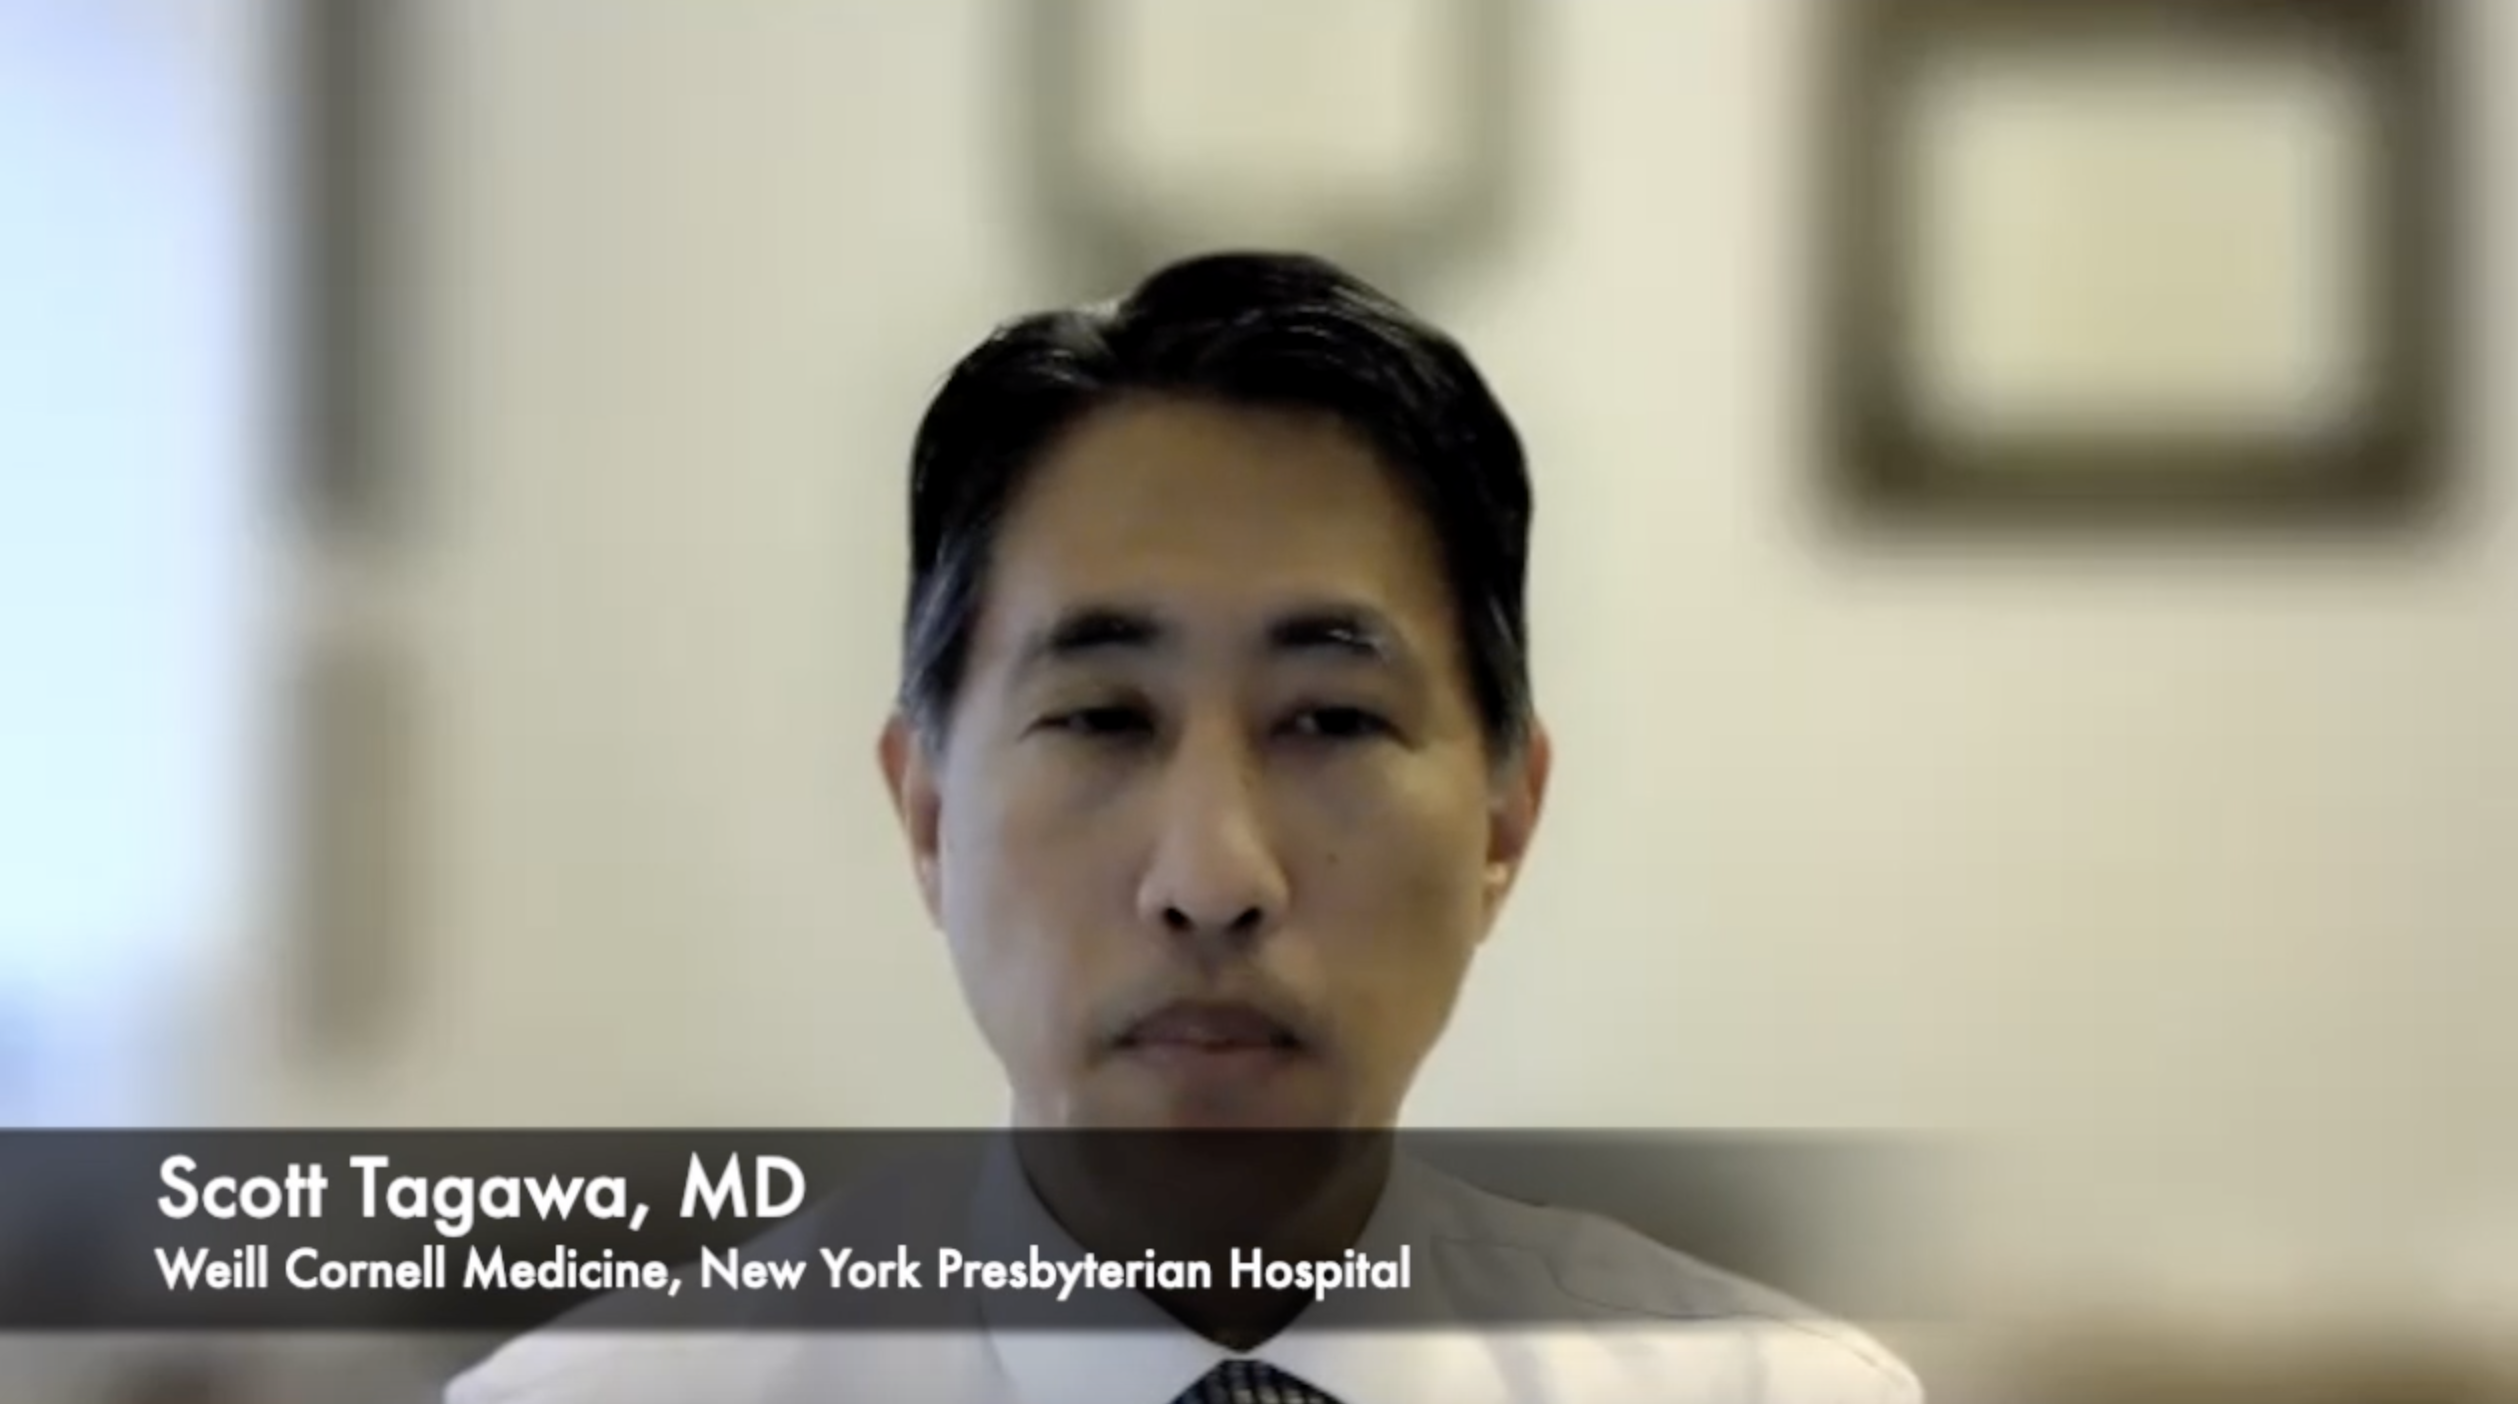 Scott Tagawa, MD, MS, detailed 2 presentations from ESMO’s presidential symposium that he thinks will have an impact on treating patients with metastatic castration-sensitive prostate cancer.